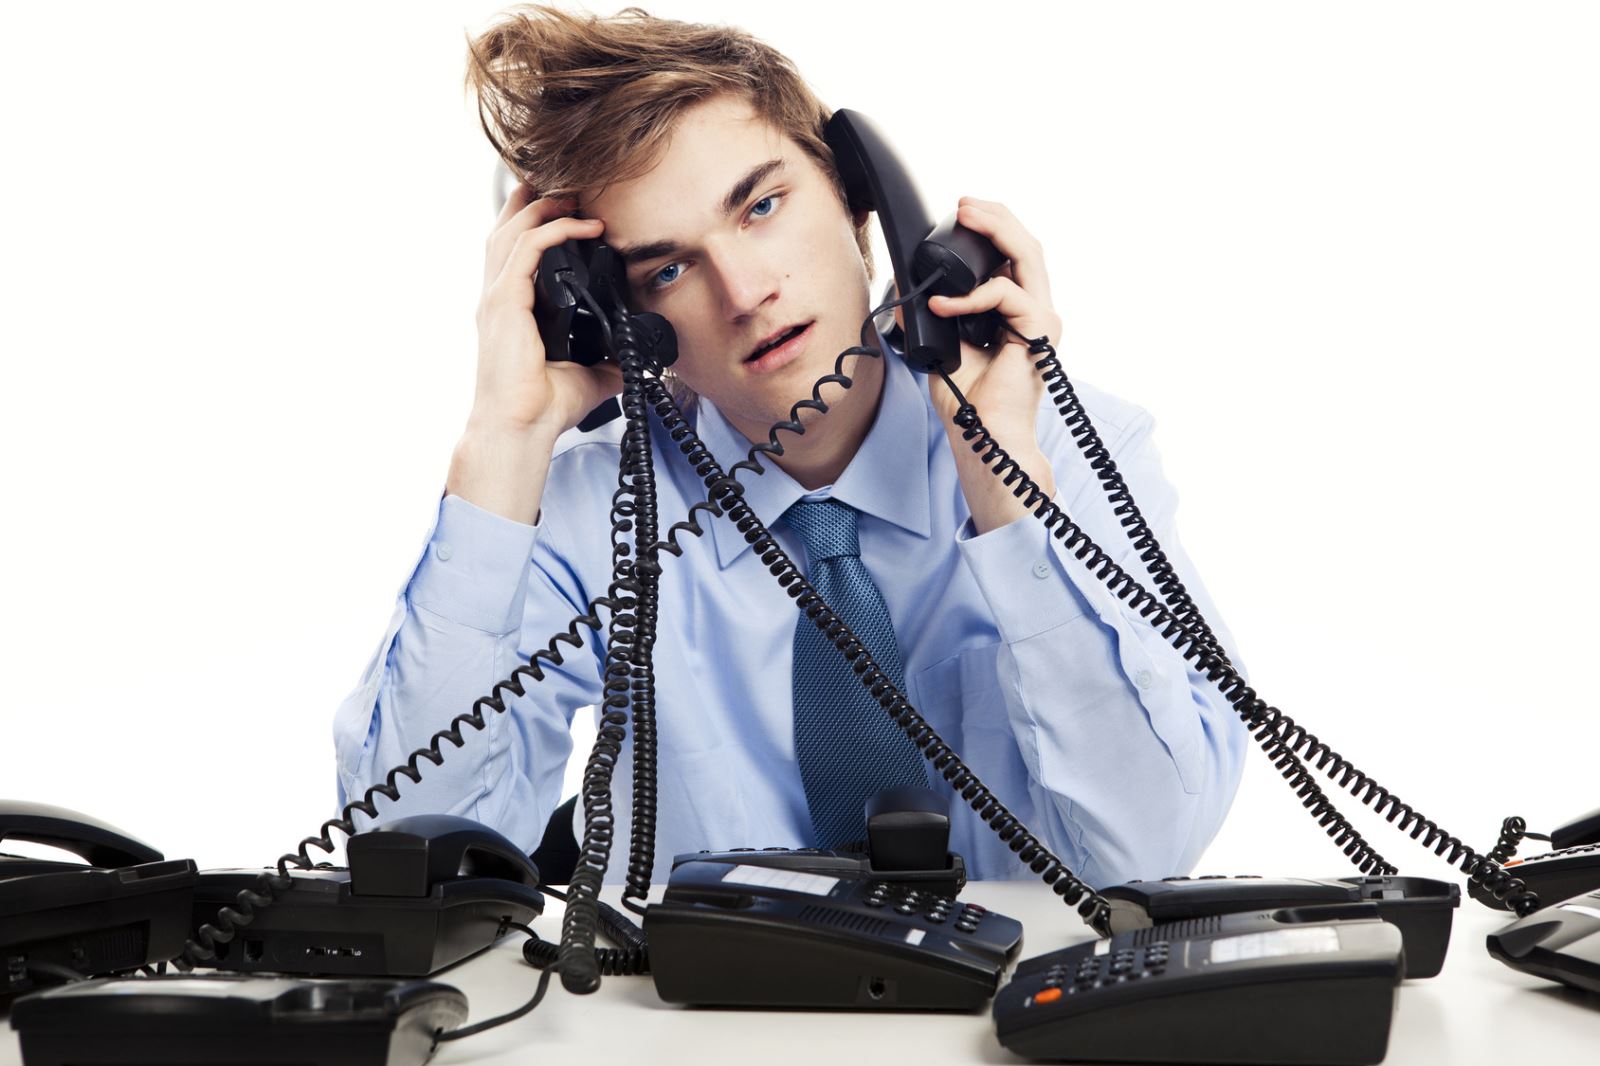 A New Age of Cold Calling: Tips, Tricks and Scripts to Make It Work